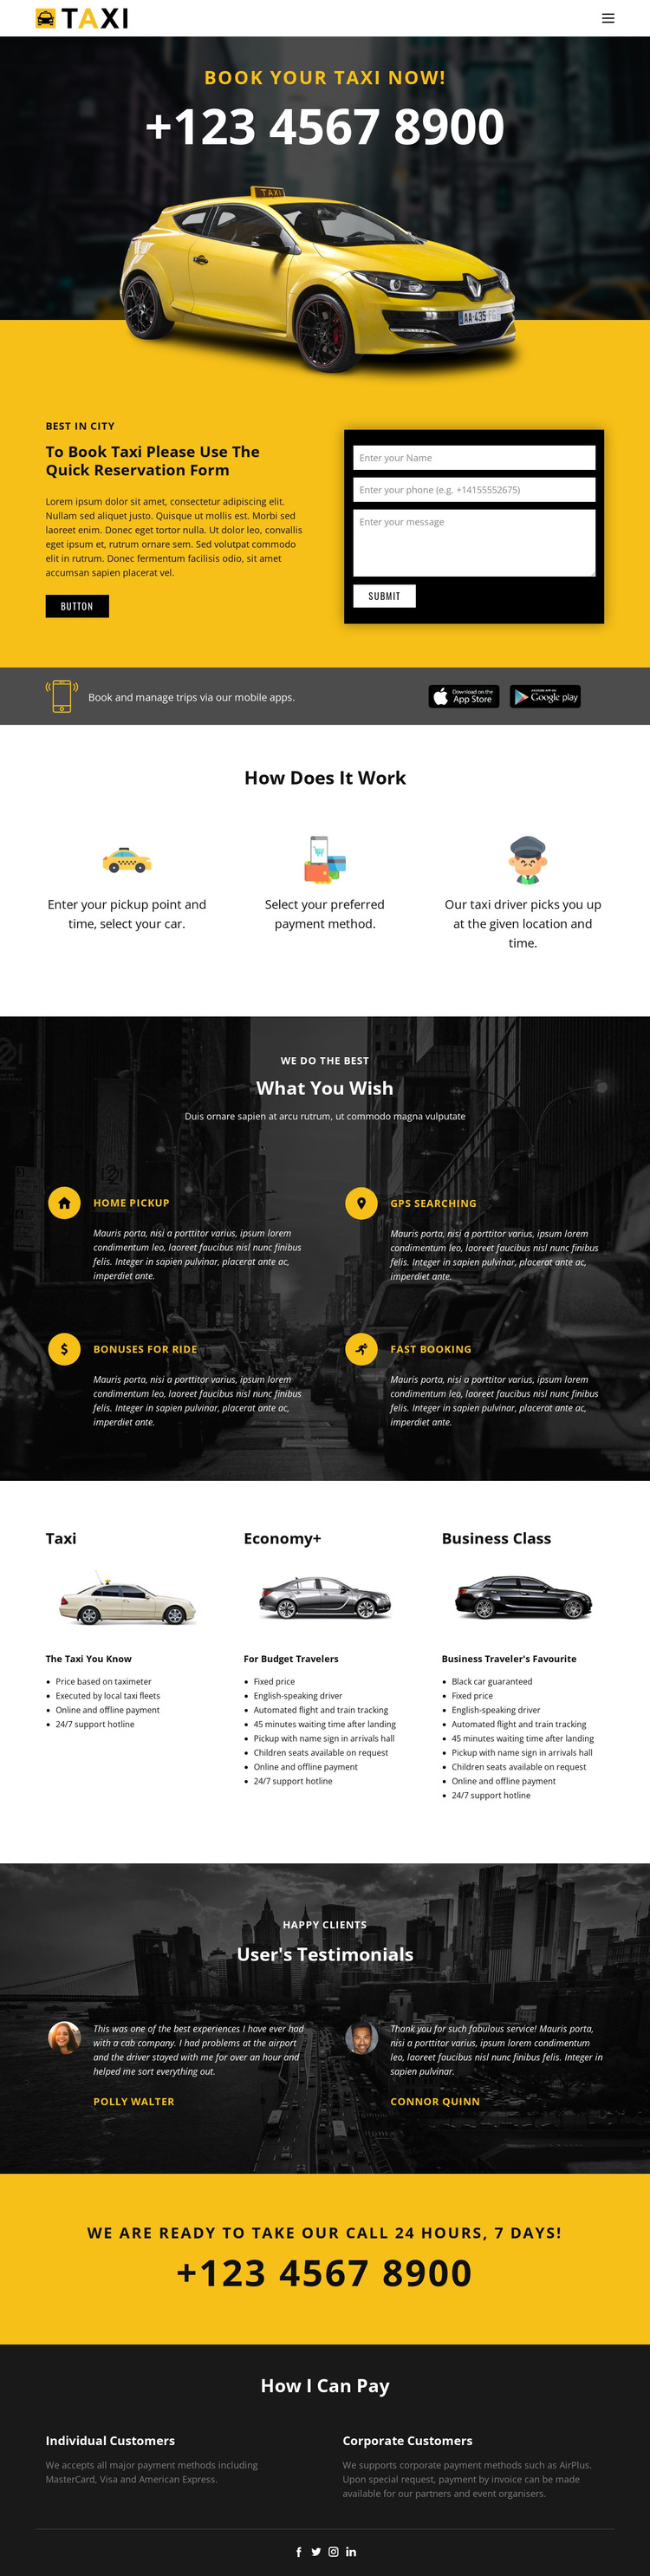 Fastest taxi cars Joomla Page Builder